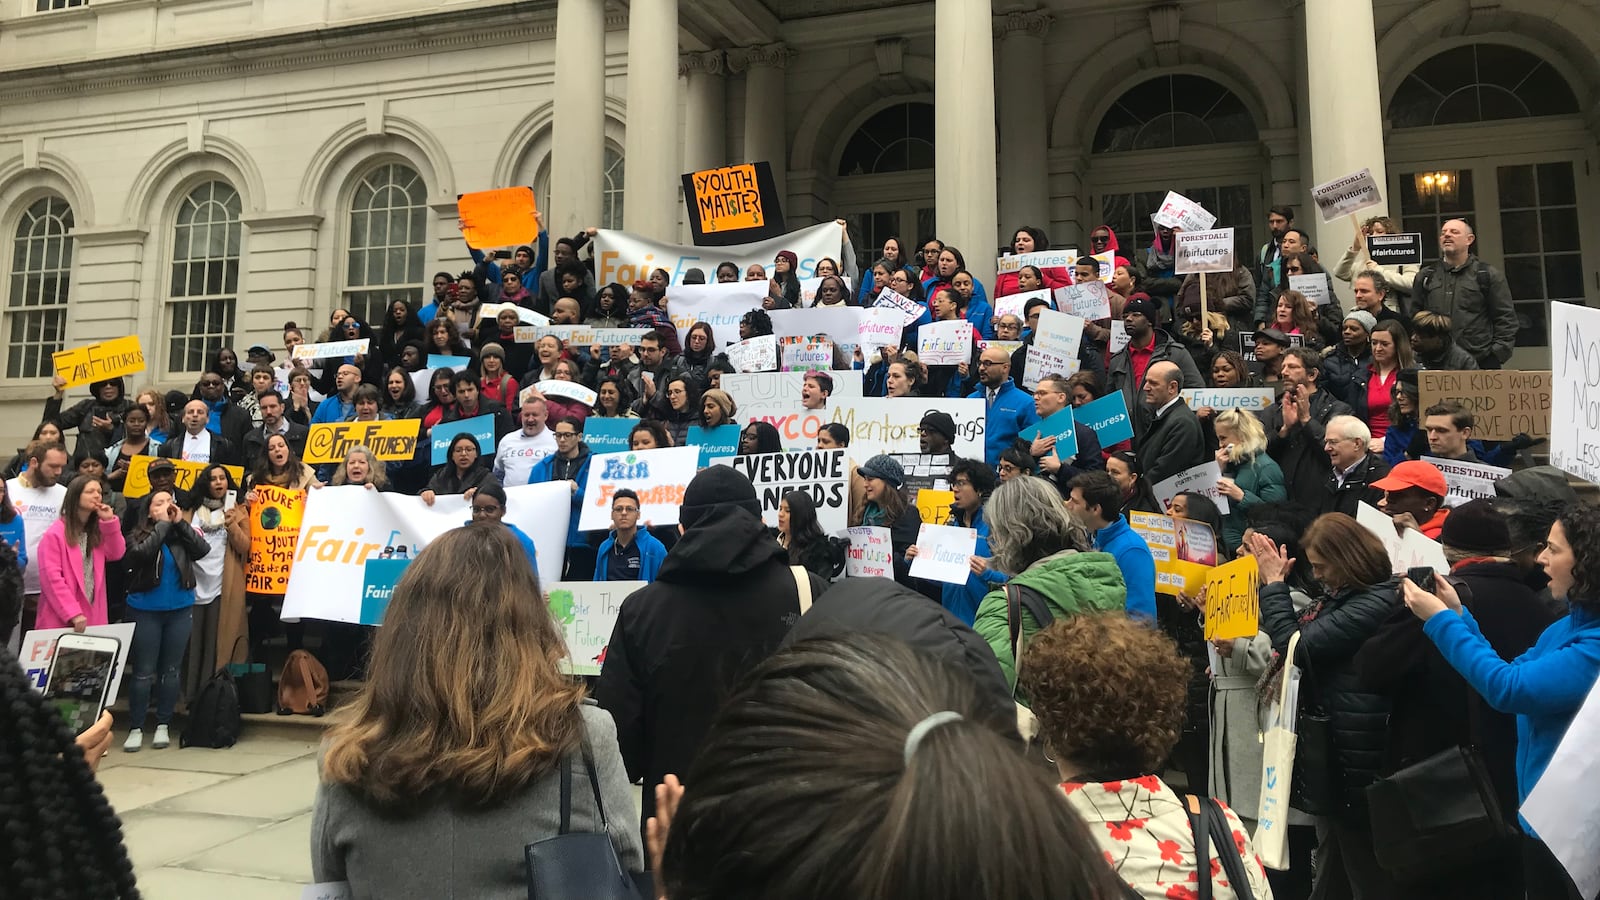 A rally was held at City Hall to demand for a comprehensive coaching program for foster youth and adults who age out of the system.